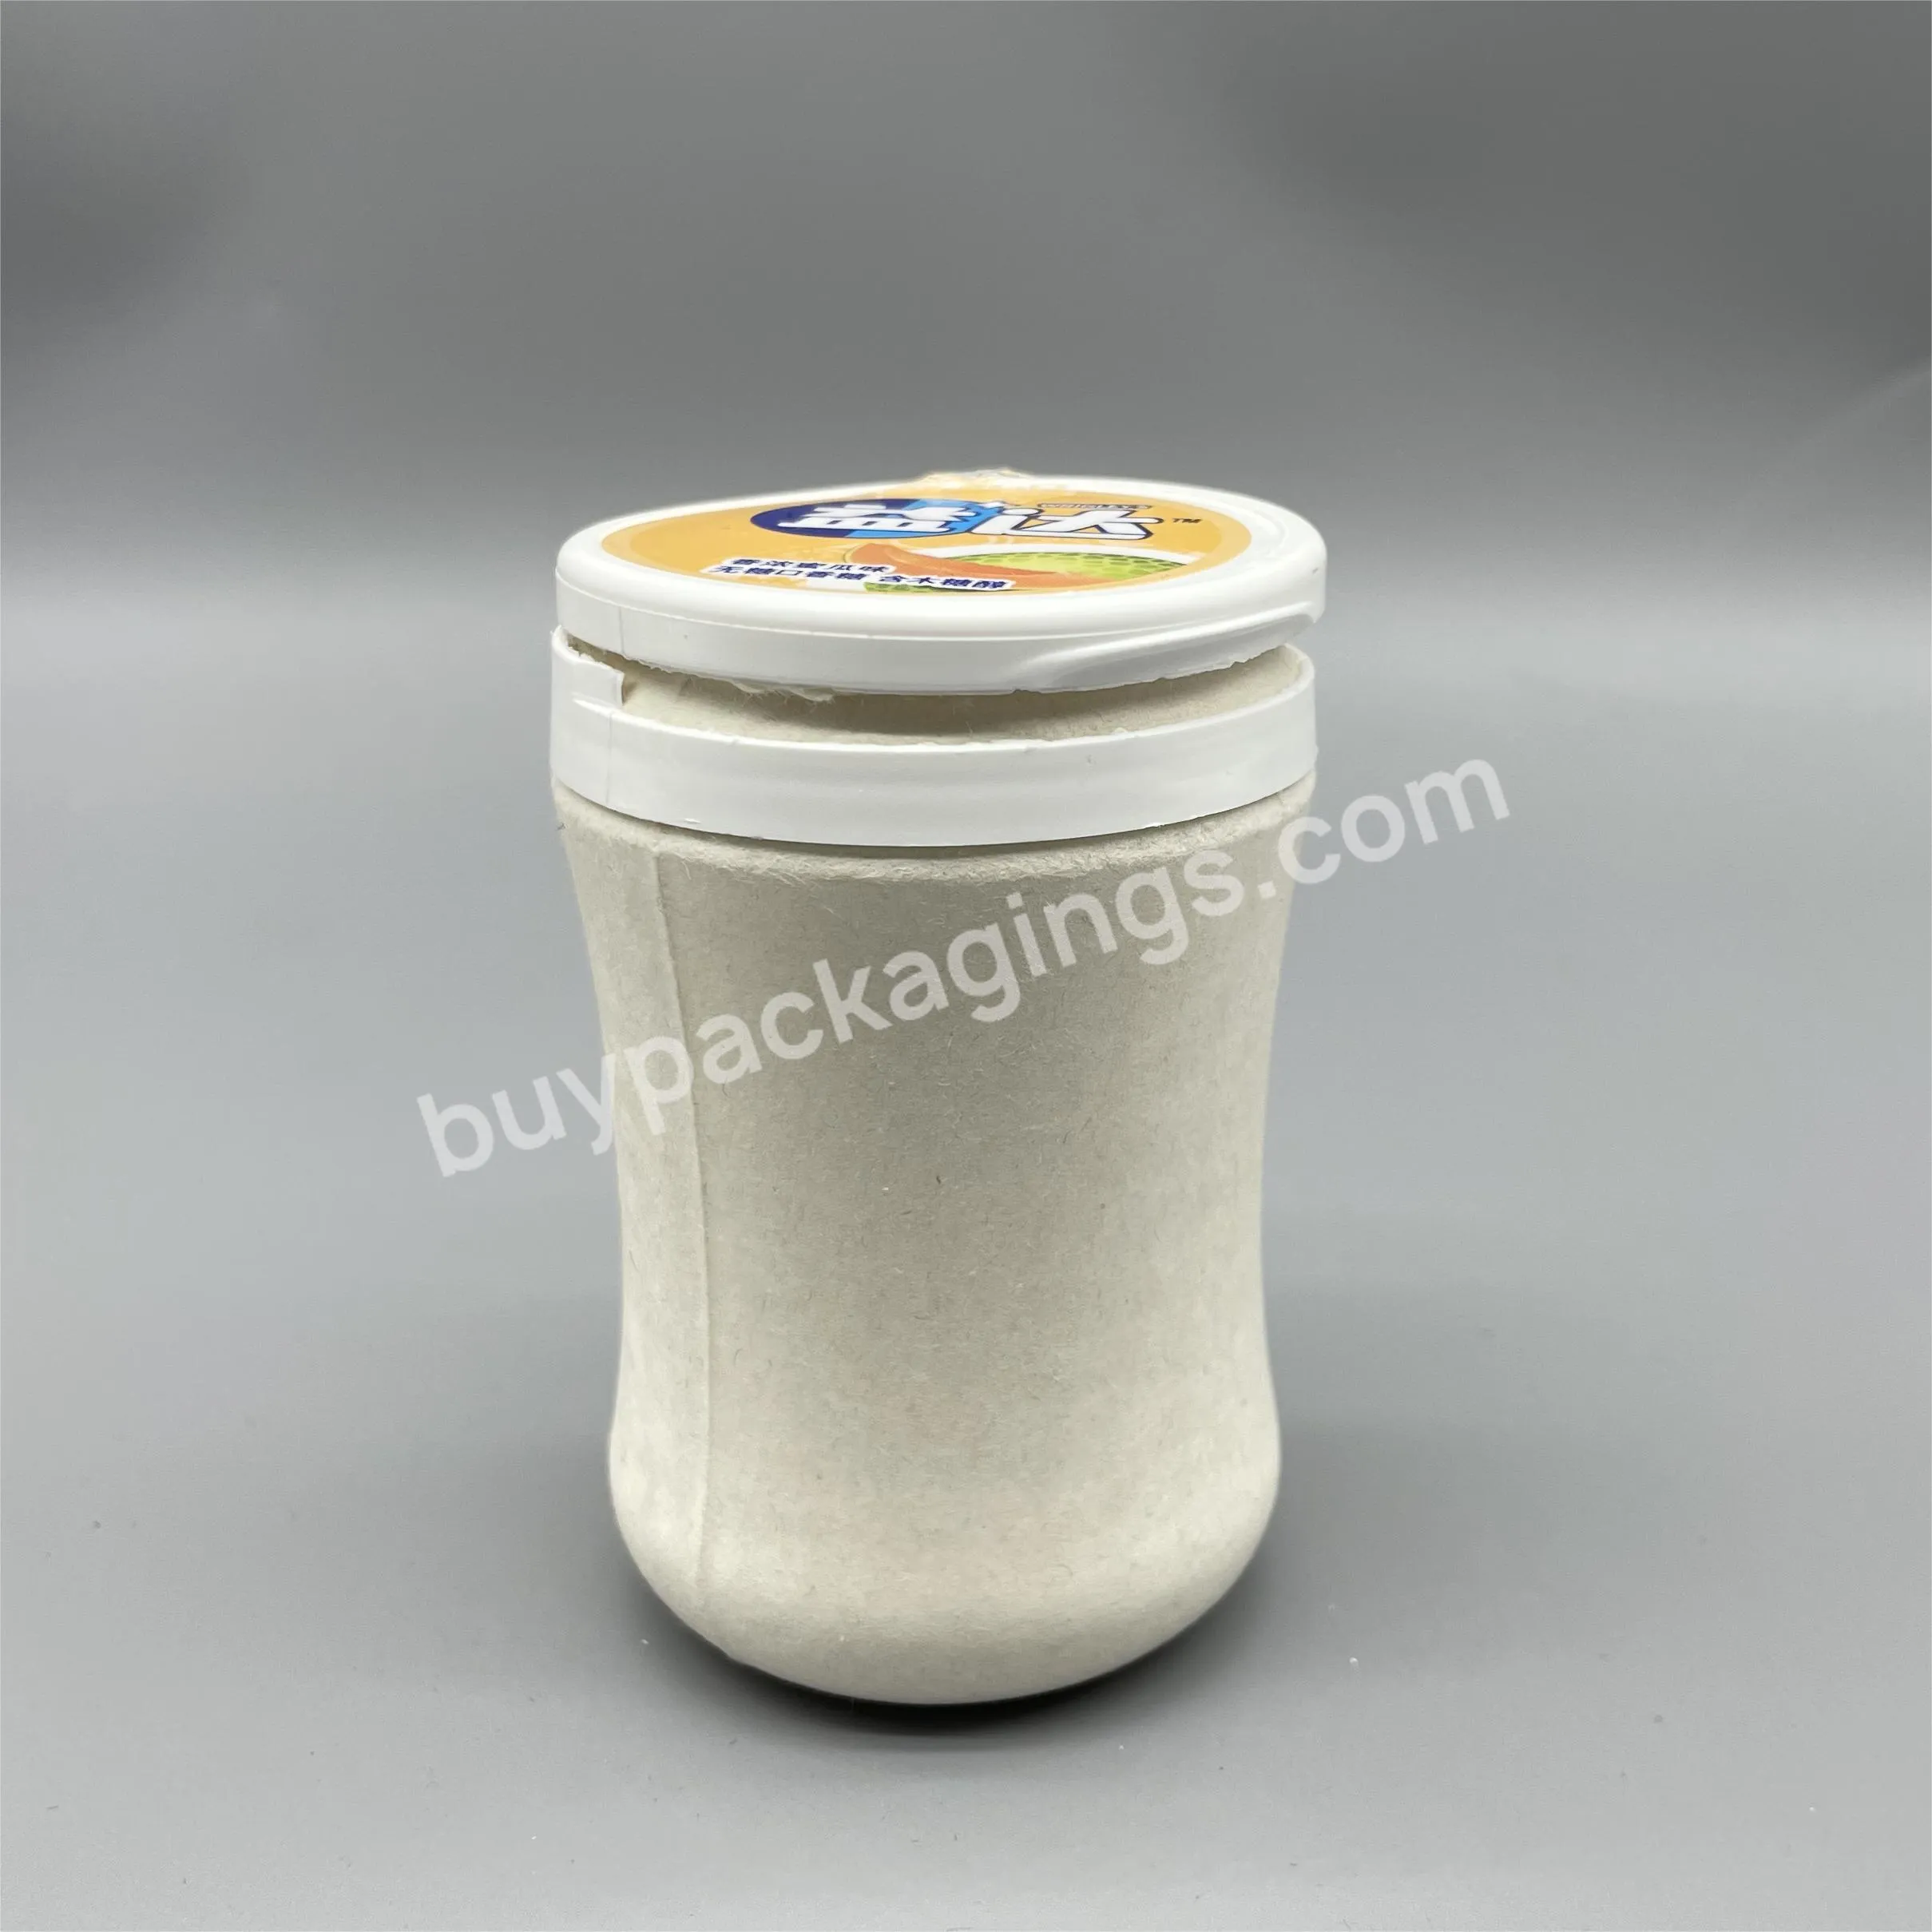 2023 New Design Plant Fiber Pulp Empty White Color Round Candy Chewing Gum Bottle - Buy Chewing Gum Bottle,Pulp Molded Fiber Candy Bottle,Chewing Gum Empty White Color Round Bottles.